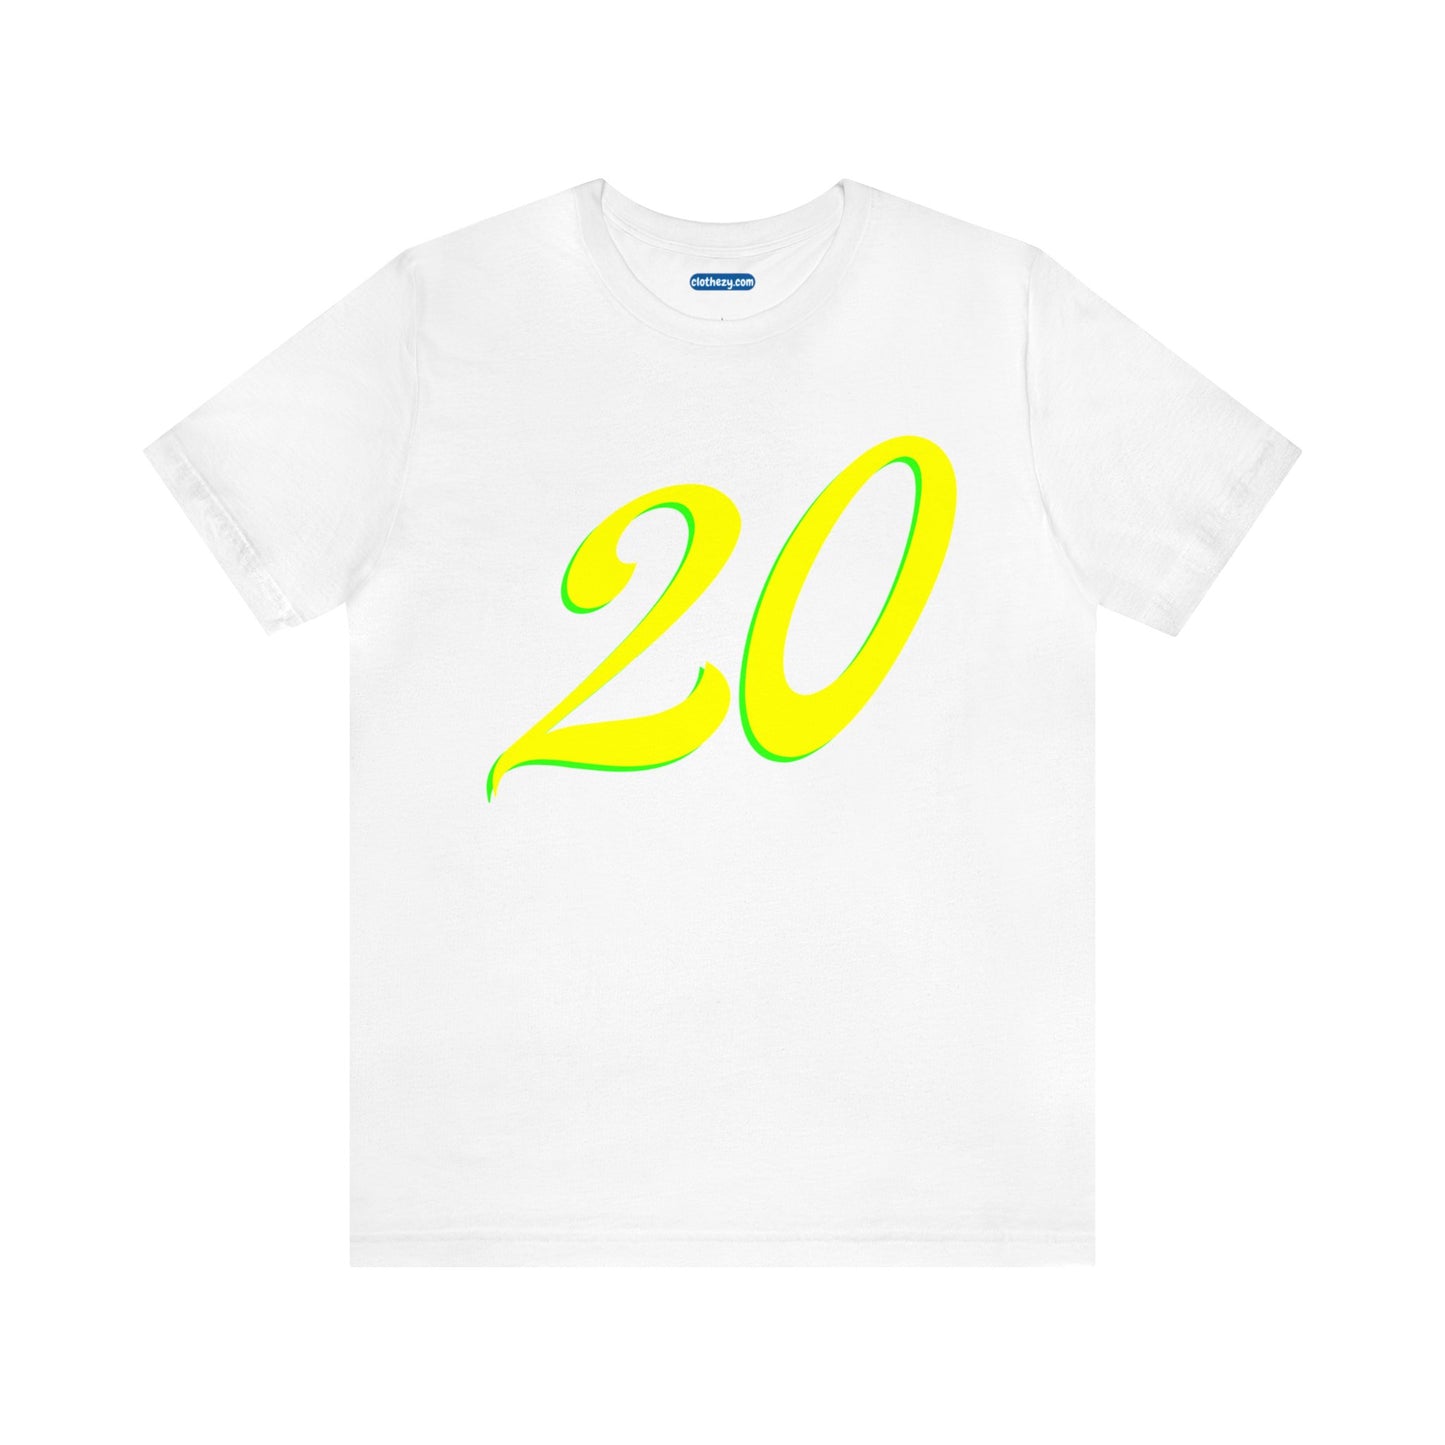 Number 20 Design - Soft Cotton Tee for birthdays and celebrations, Gift for friends and family, Multiple Options by clothezy.com in White Size Small - Buy Now